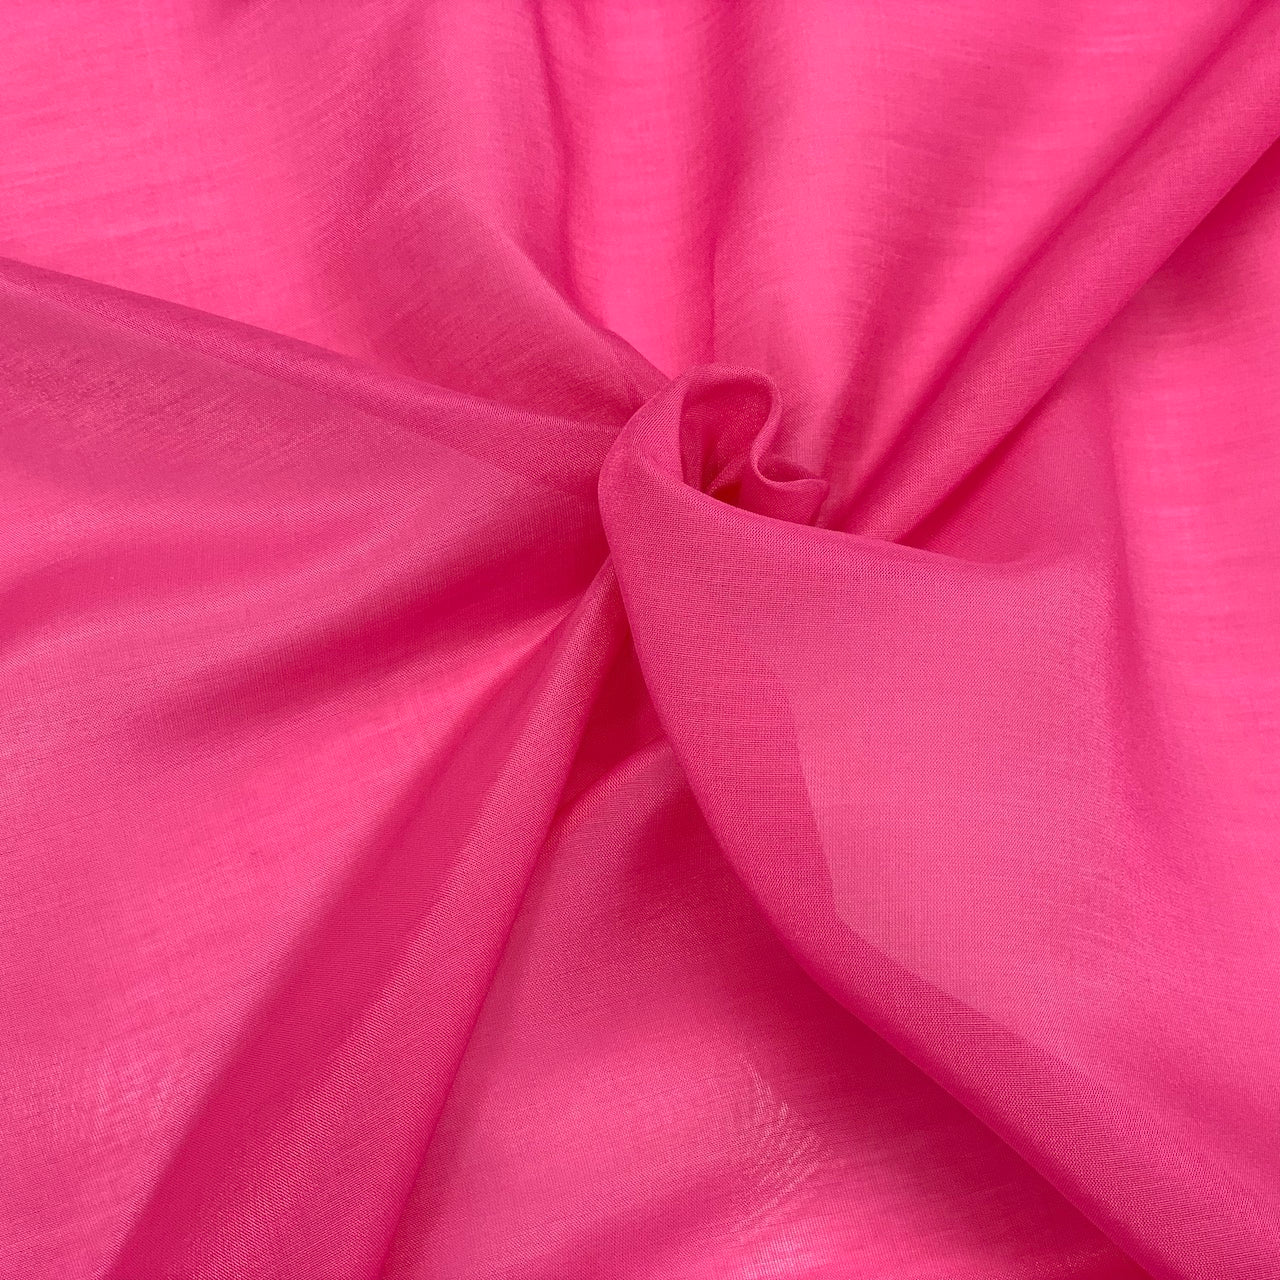 silk cotton fabric luxe pink voile fabric collection